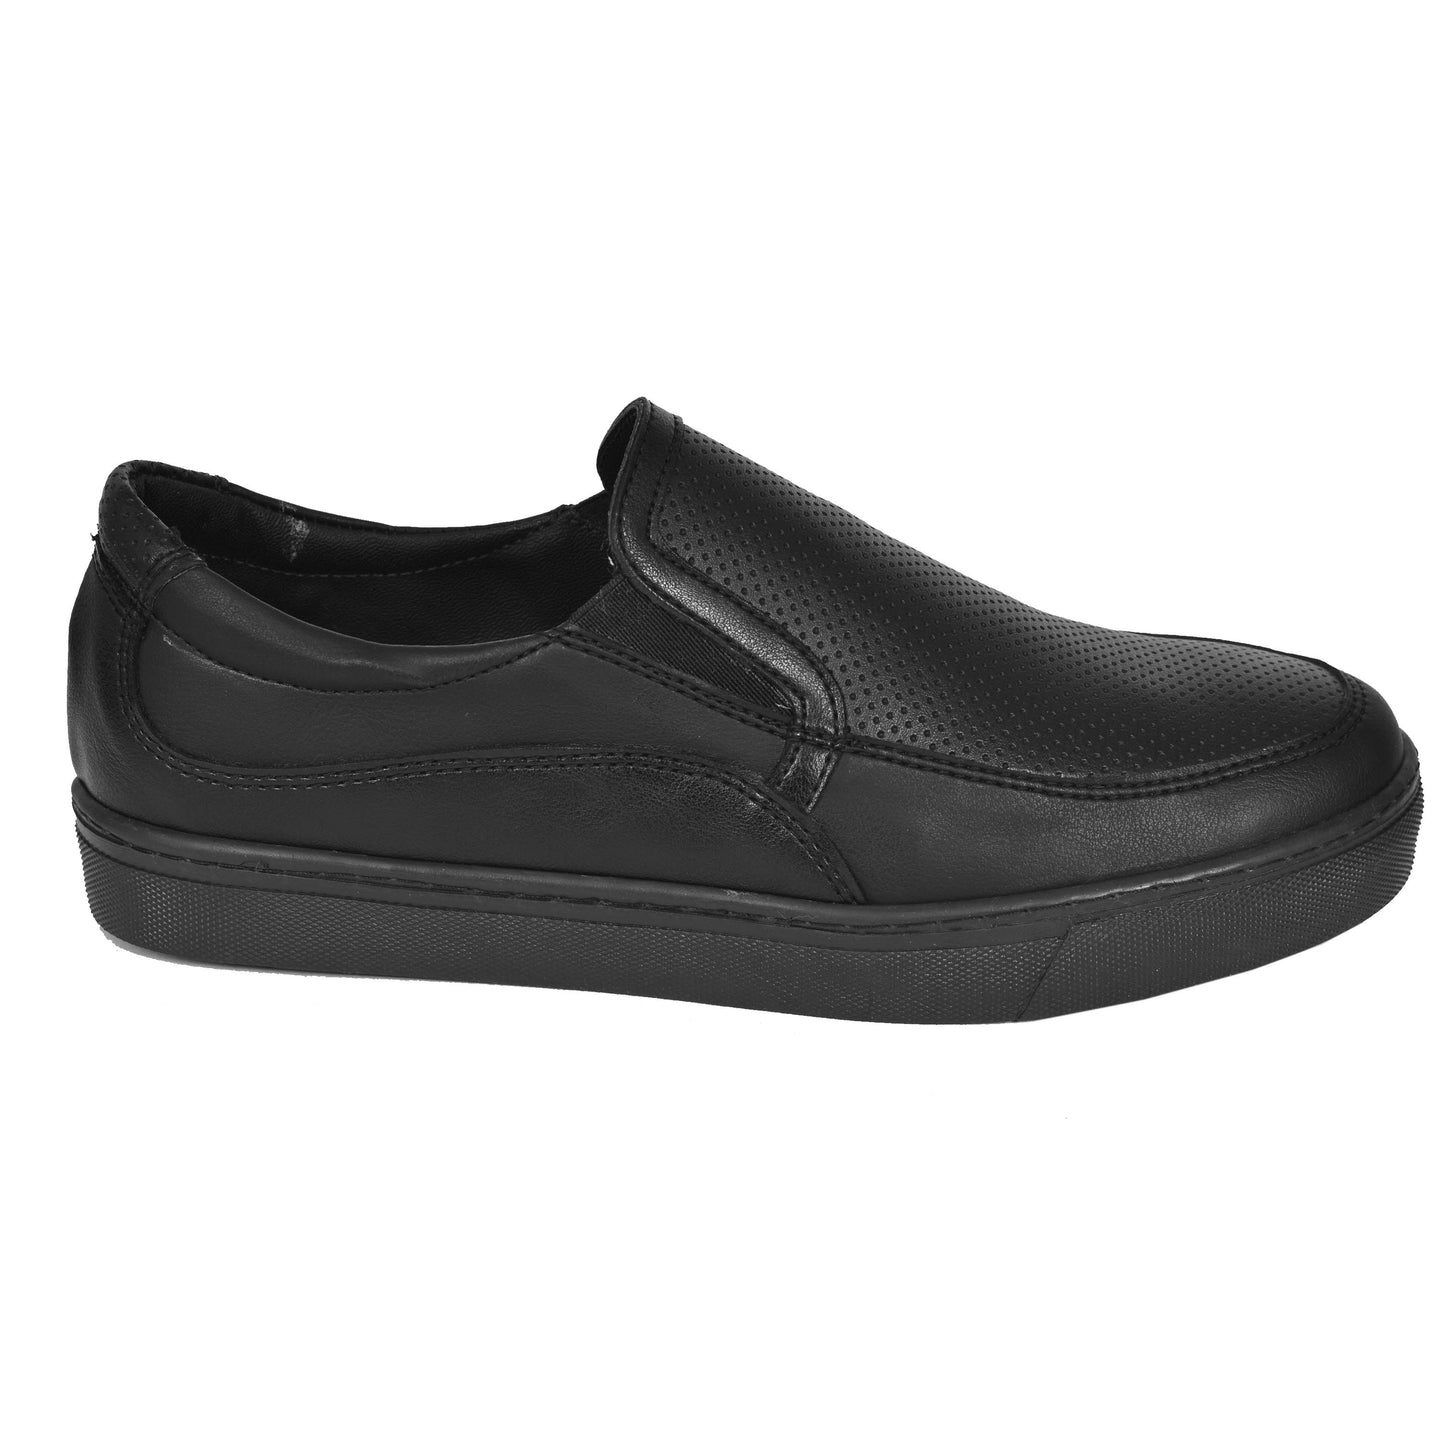 2H #9536 Black Casual Shoes